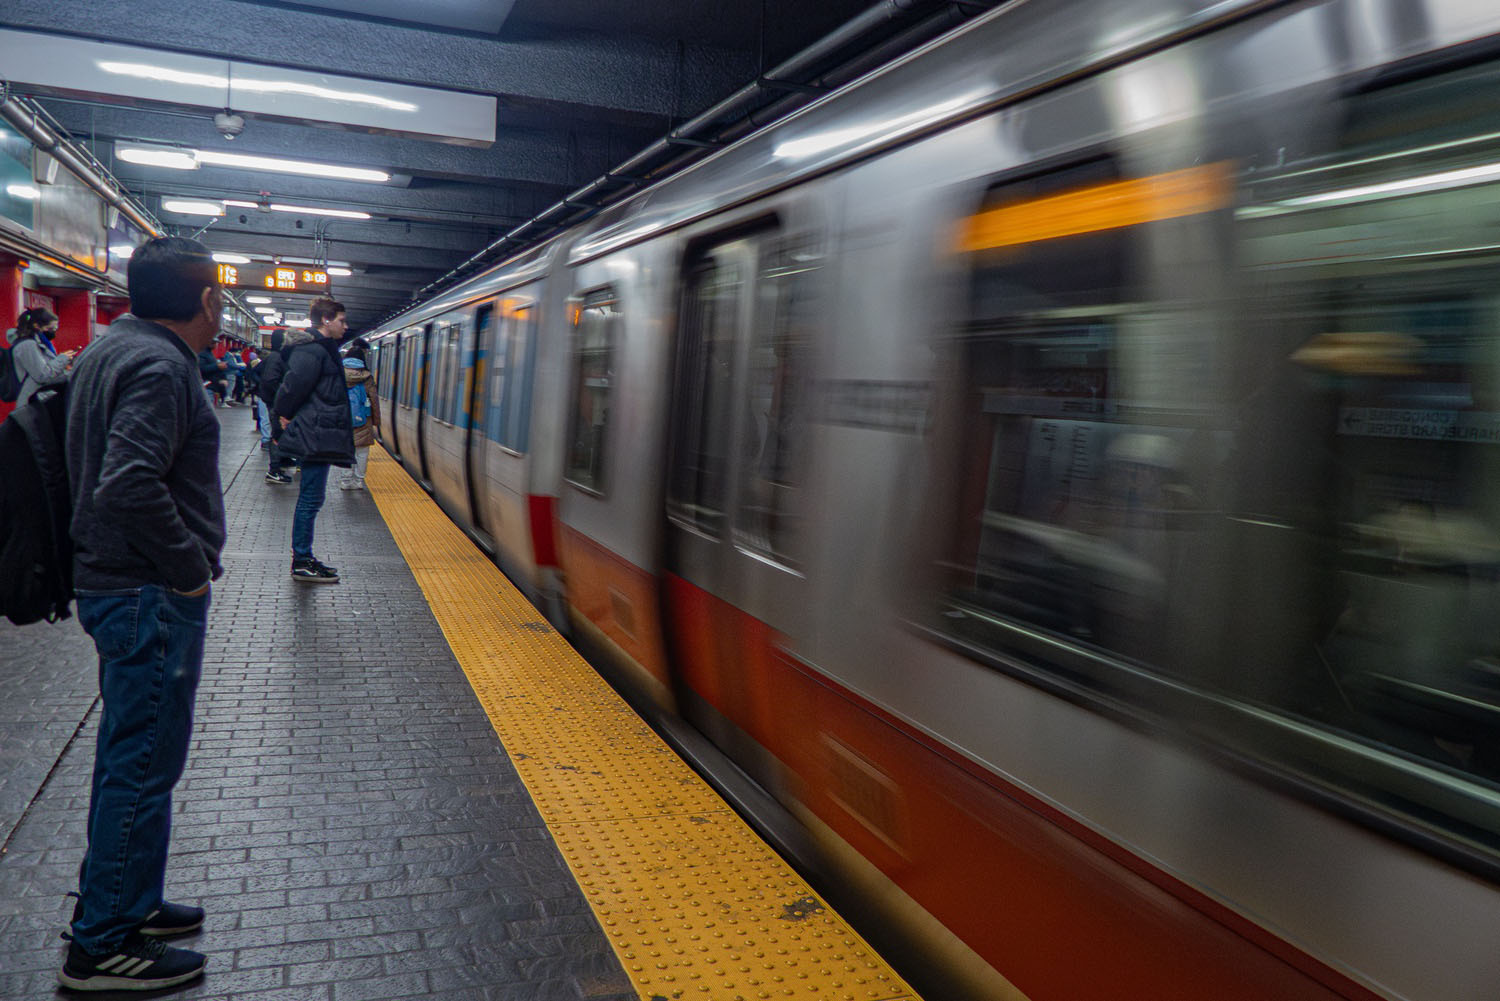 The MBTA Red Line was closed for maintenance from Feb. 5 to Feb. 14, as part of a project to reduce slowdowns and increase safety by upgrading track infrastructure.